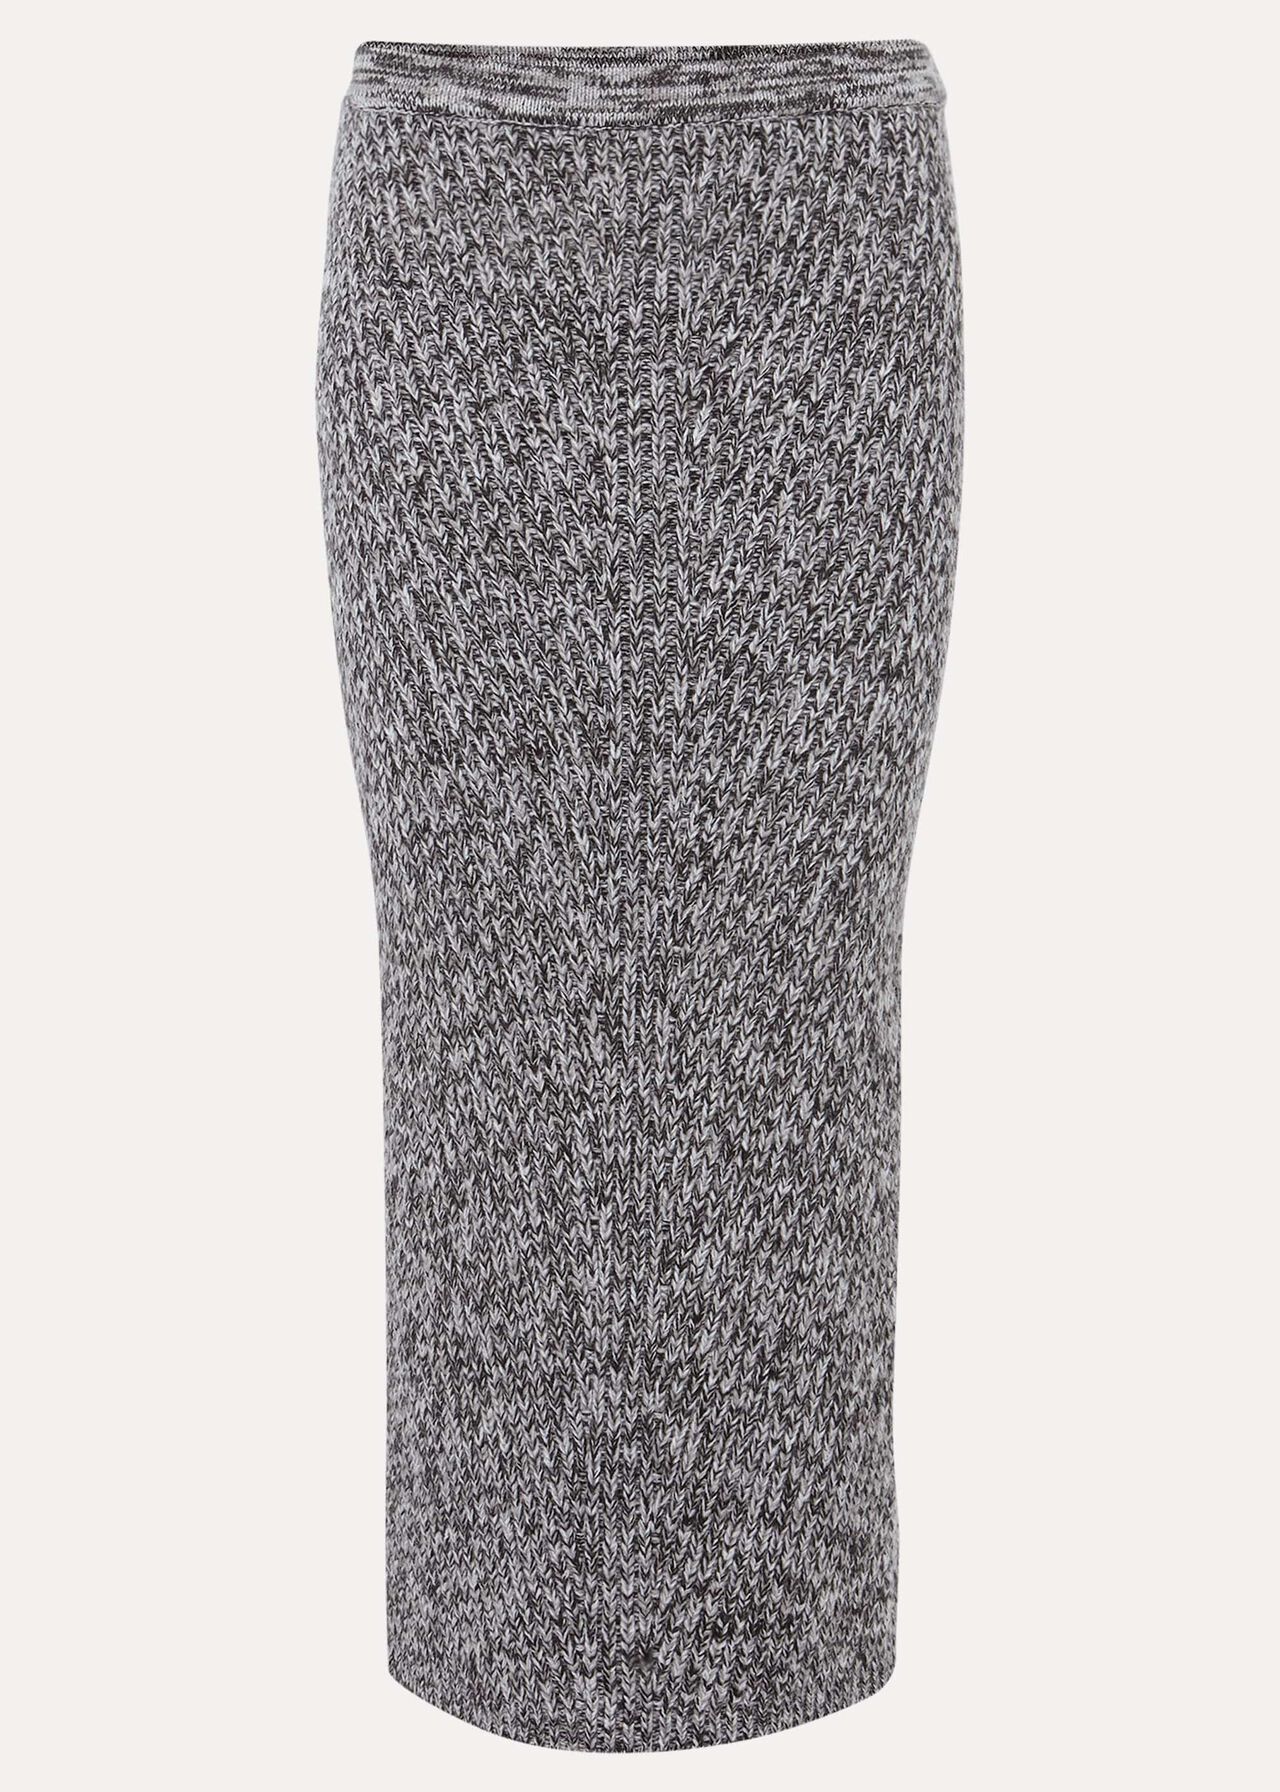 Marina Flecked Coord Knitted Skirt